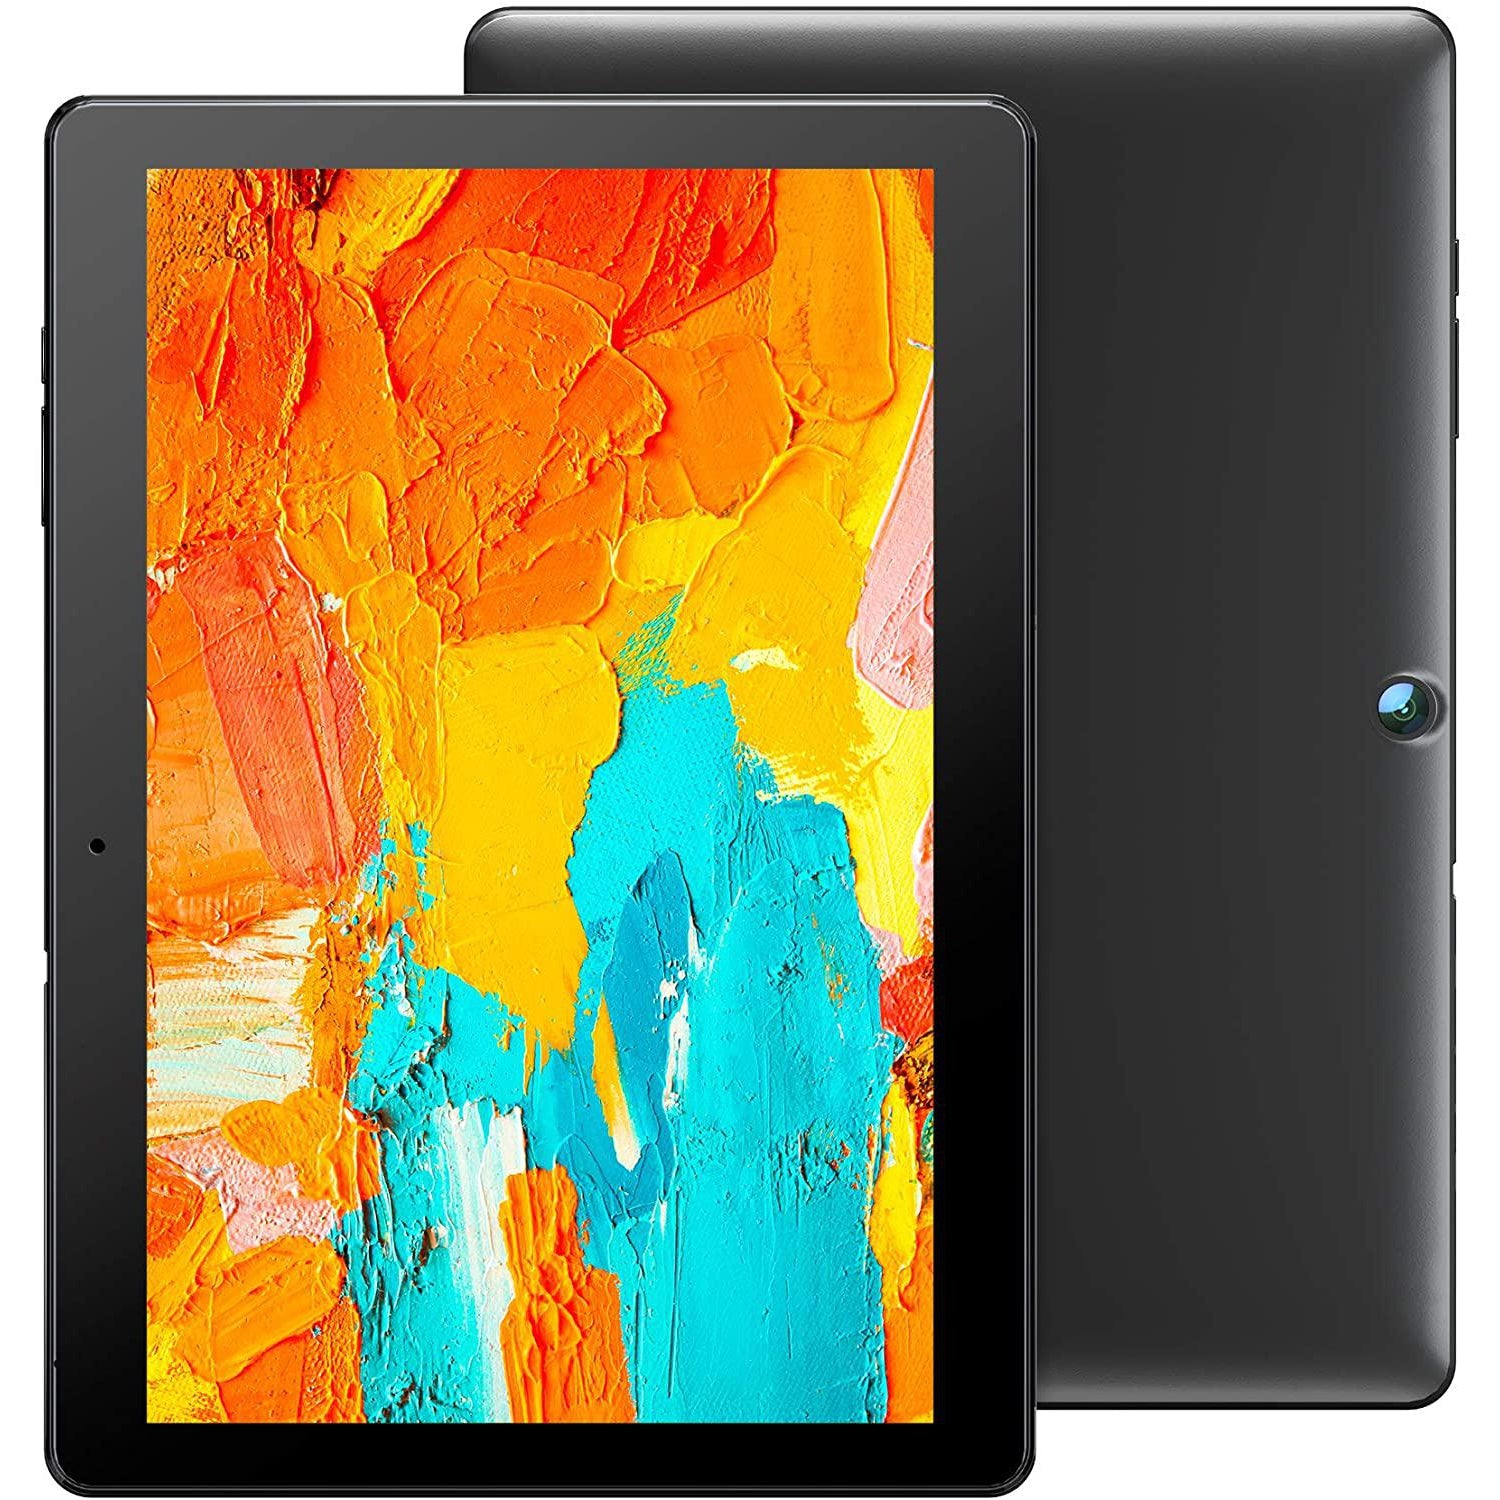 Voger PriorPad X100 Tablet 10 inch, IPS HD Display, Android 10.0, 2GB RAM, 32GB